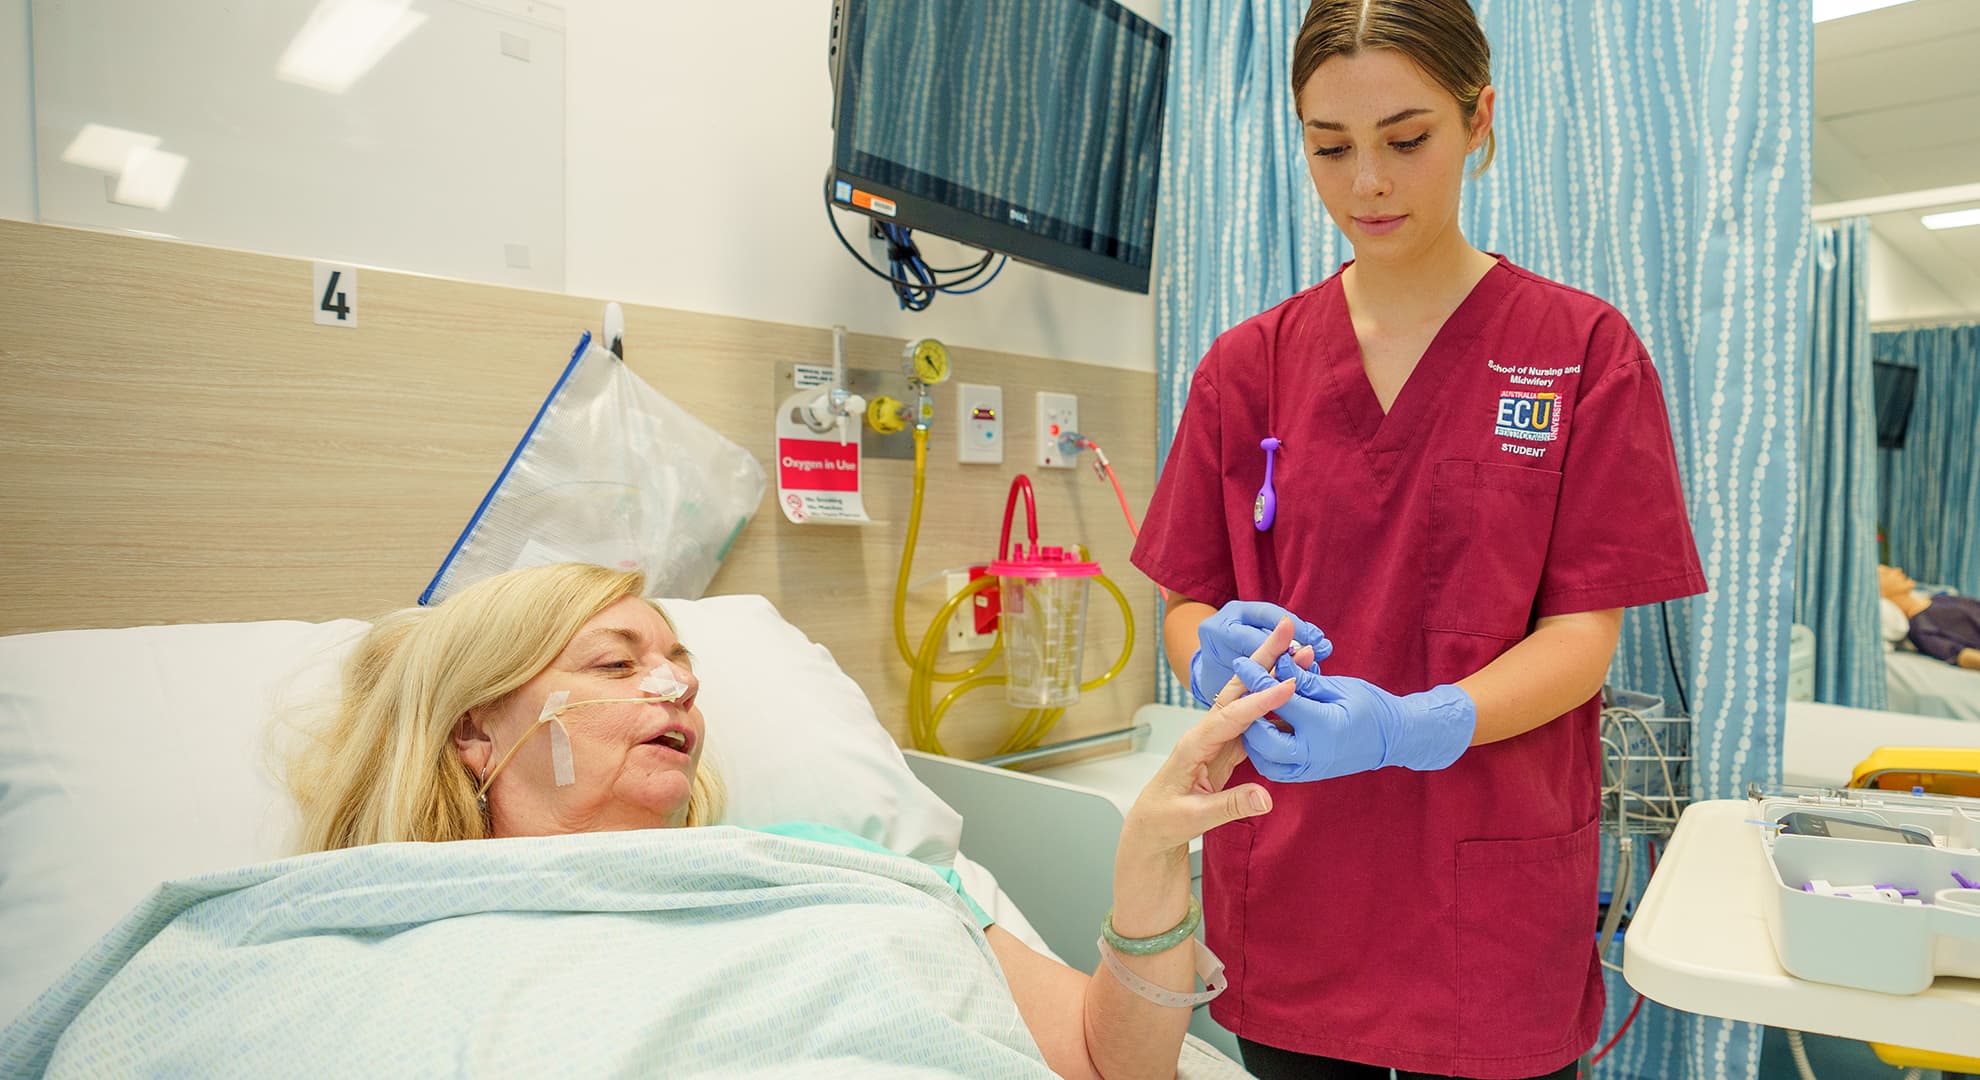 Student nurse standing next to a patient in bed.